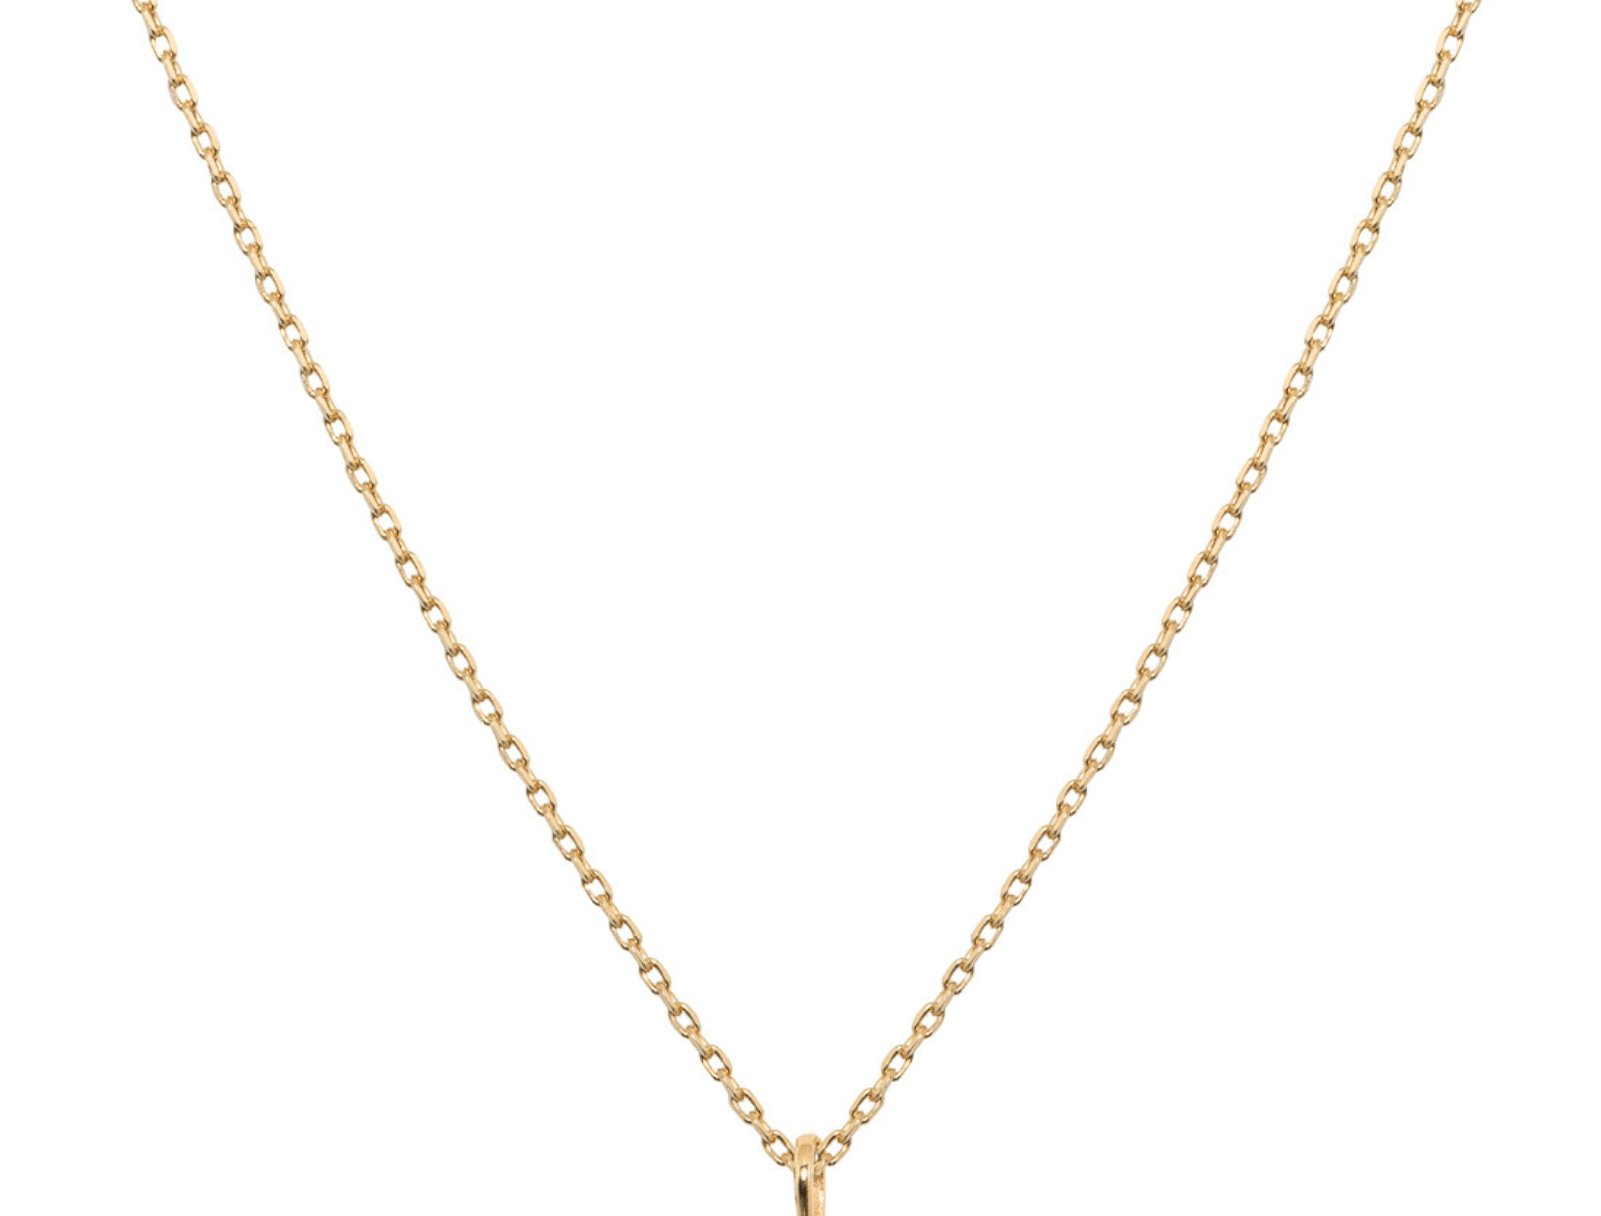 Picture of  Luna Rae solid 9k gold Topaz Necklace